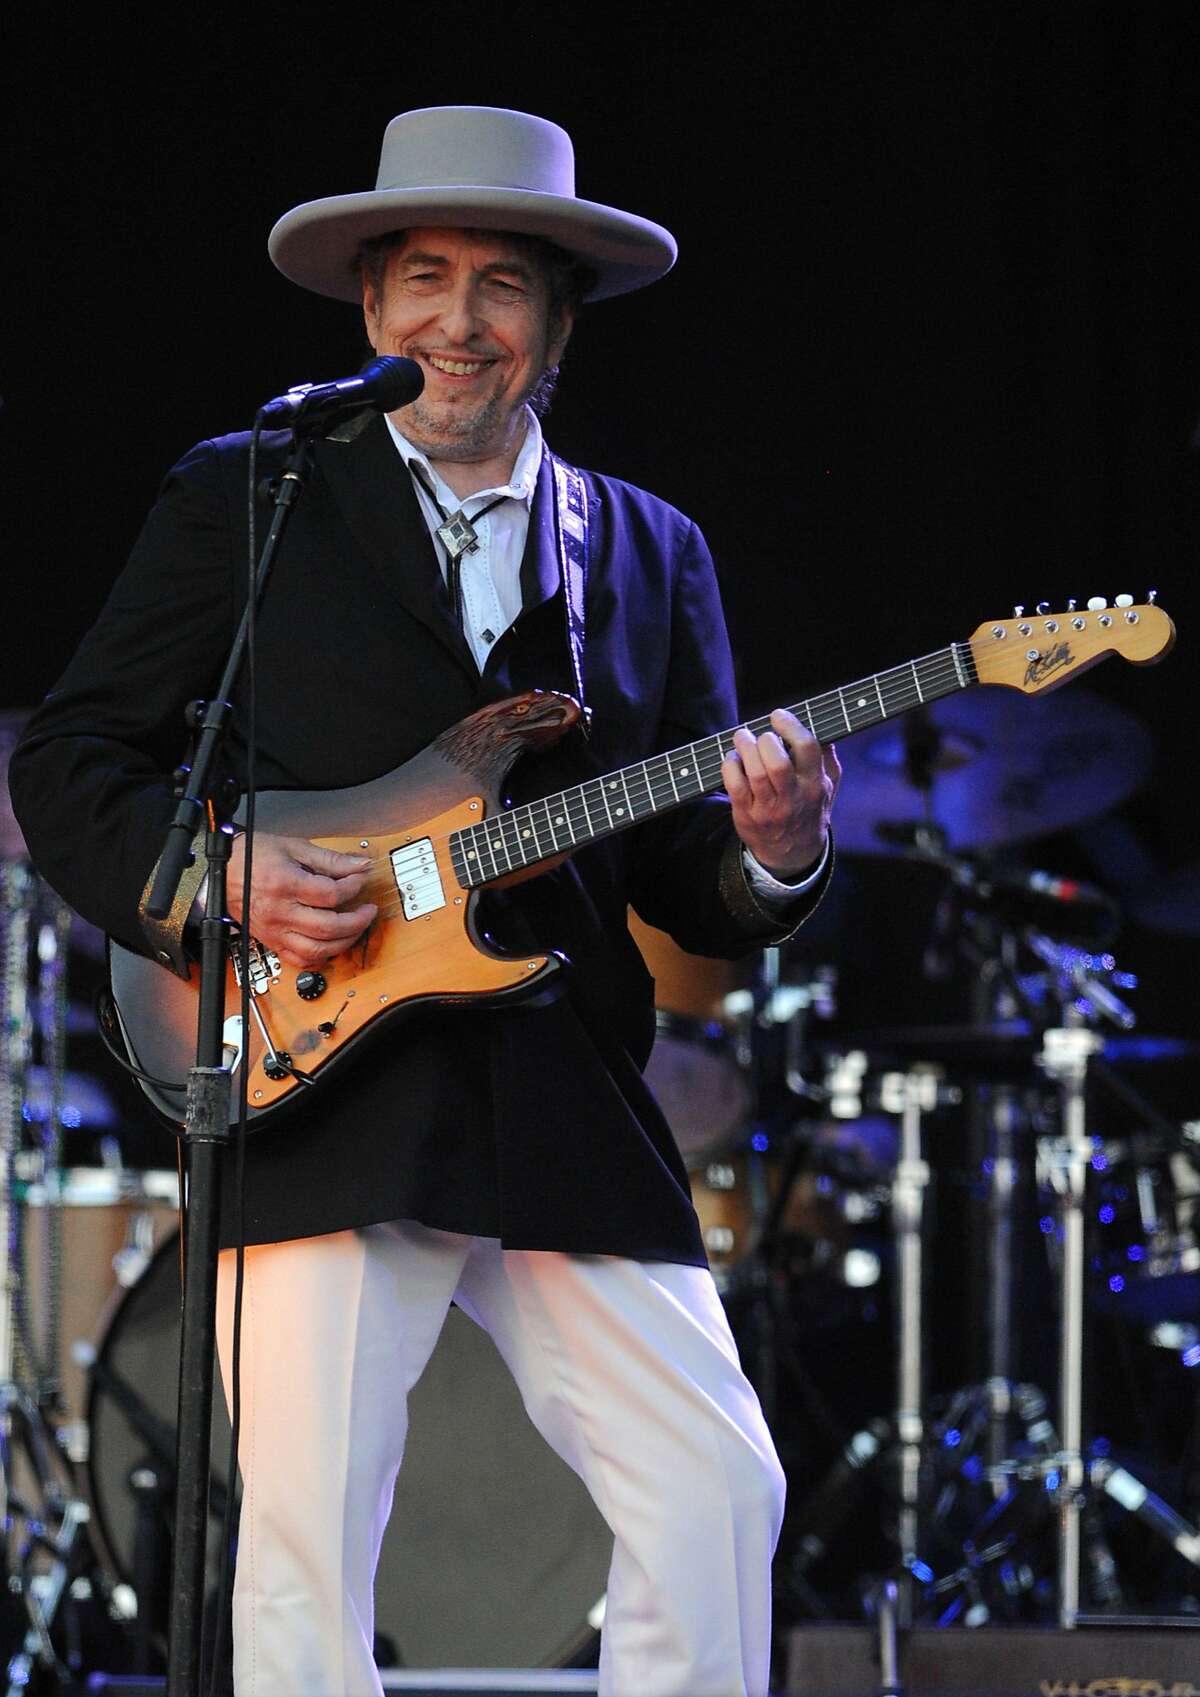 (FILES) This file photo taken on July 22, 2012 shows US legend Bob Dylan performing on stage during the 21st edition of the Vieilles Charrues music festival in Carhaix-Plouguer, western France. Bob Dylan has hailed Amy Winehouse as the last great artist with an individual style as the rock legend shared his views on music in a rare interview. In a lengthy dialogue with writer Bill Flanagan posted on Dylan's website, the new winner of the Nobel Prize for Literature hailed the English soul singer who died in 2011 at age 27."She was the last real individualist around," Dylan said. / AFP PHOTO / Fred TANNEAUFRED TANNEAU/AFP/Getty Images